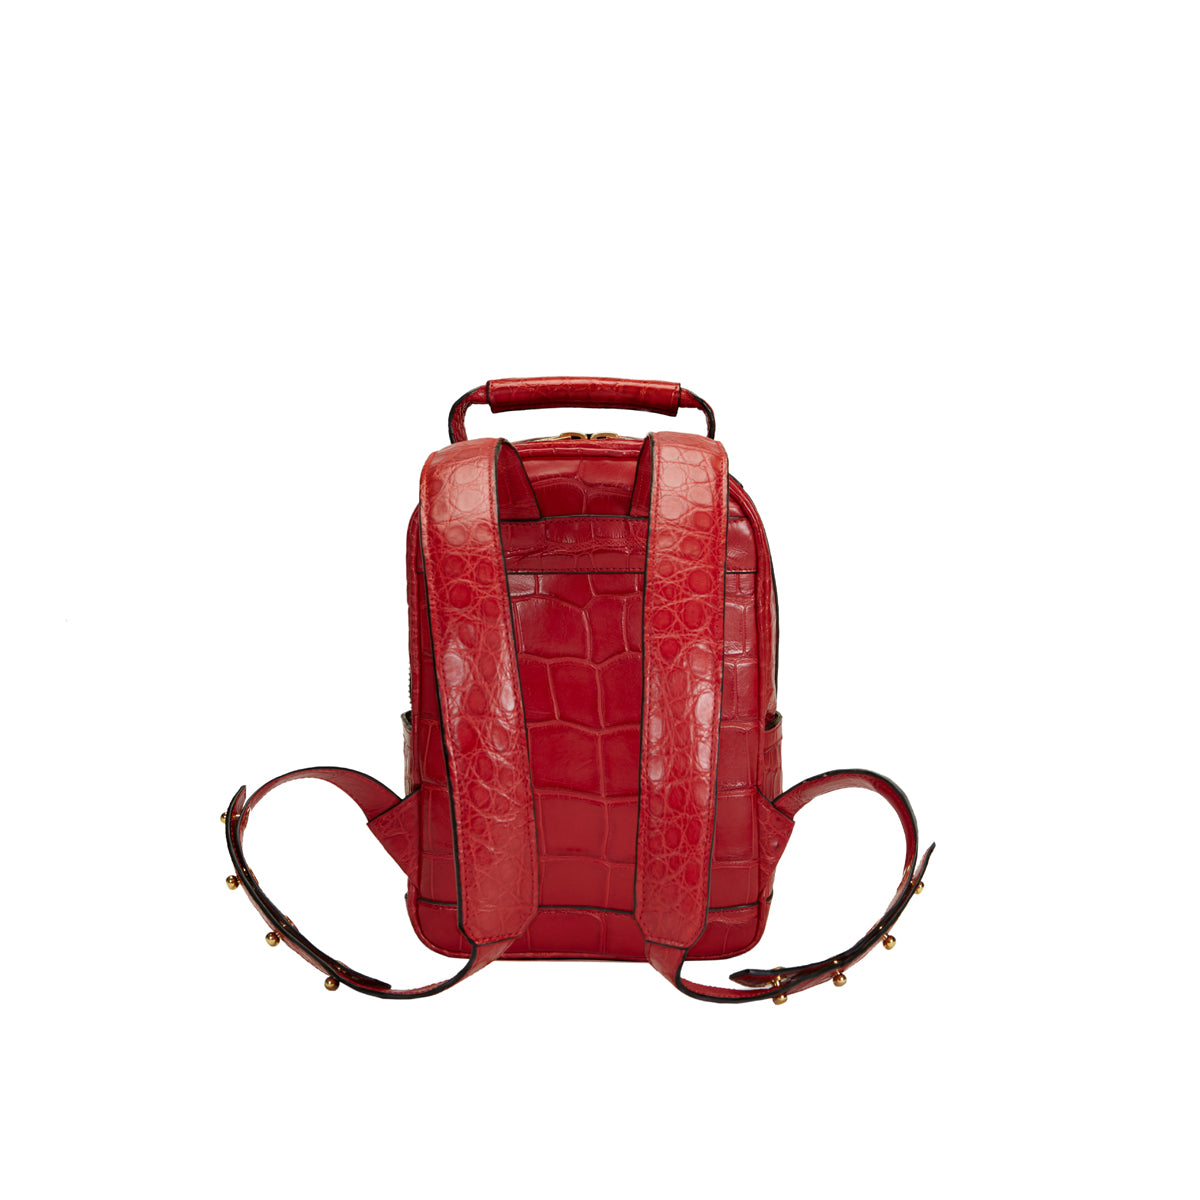 STALVEY Brighton Flat Front Backpack in Mini Red Alligator Back View